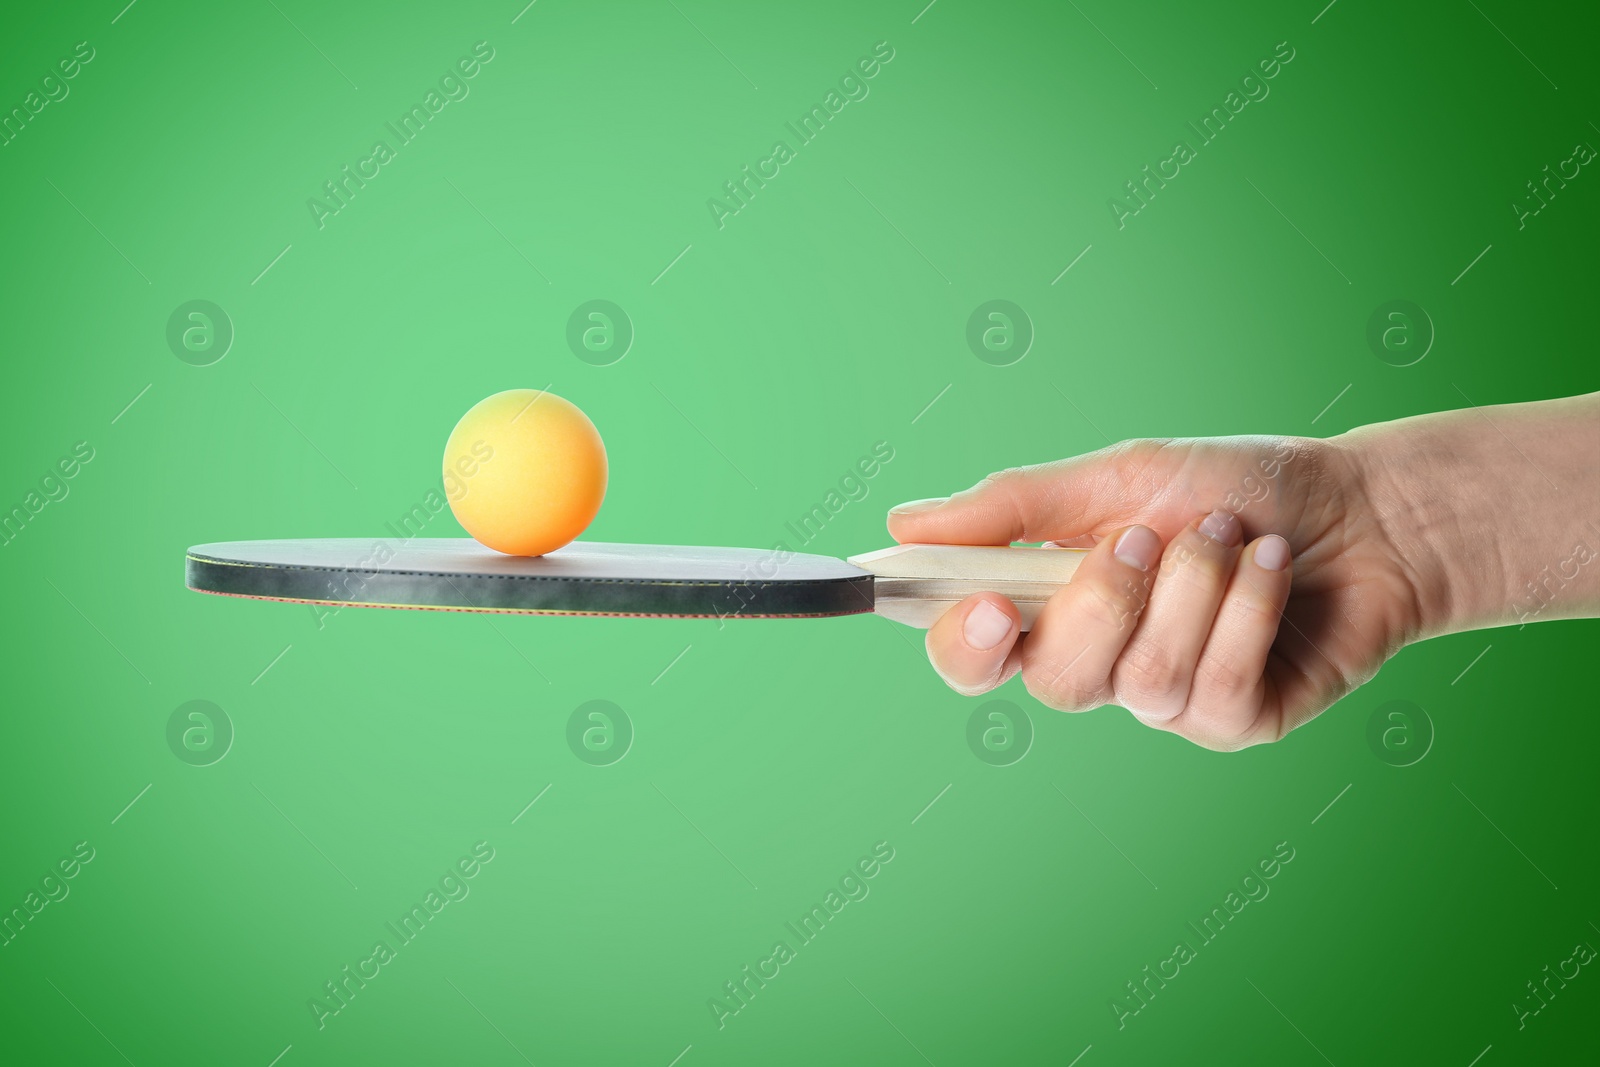 Image of Woman holding ping pong paddle with ball on green background, closeup. Table tennis championship